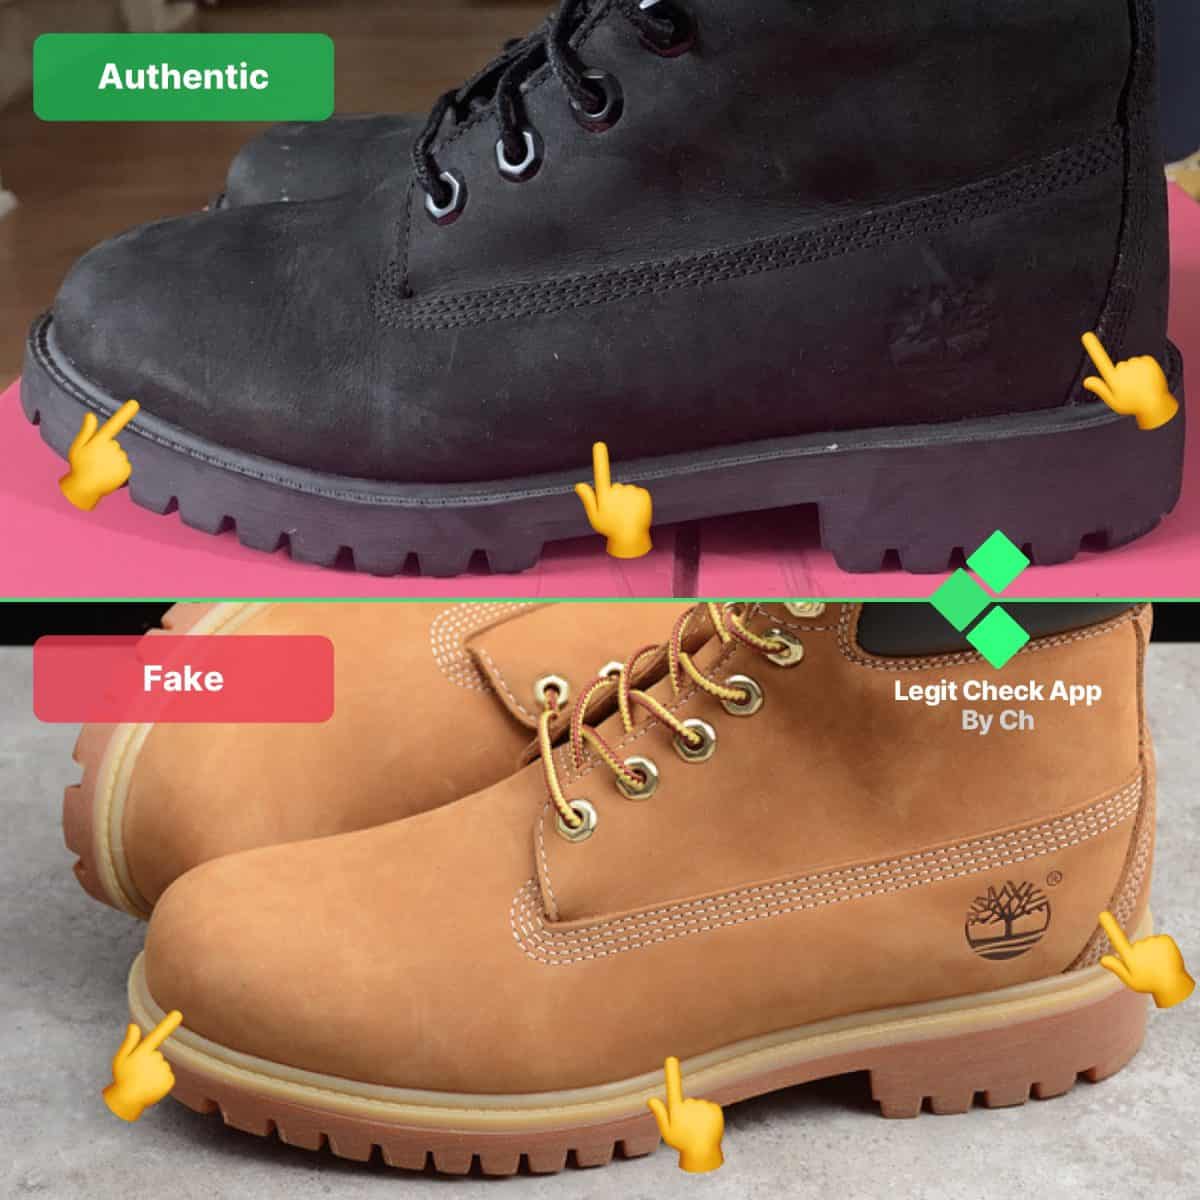 authentic vs fake timberland boots